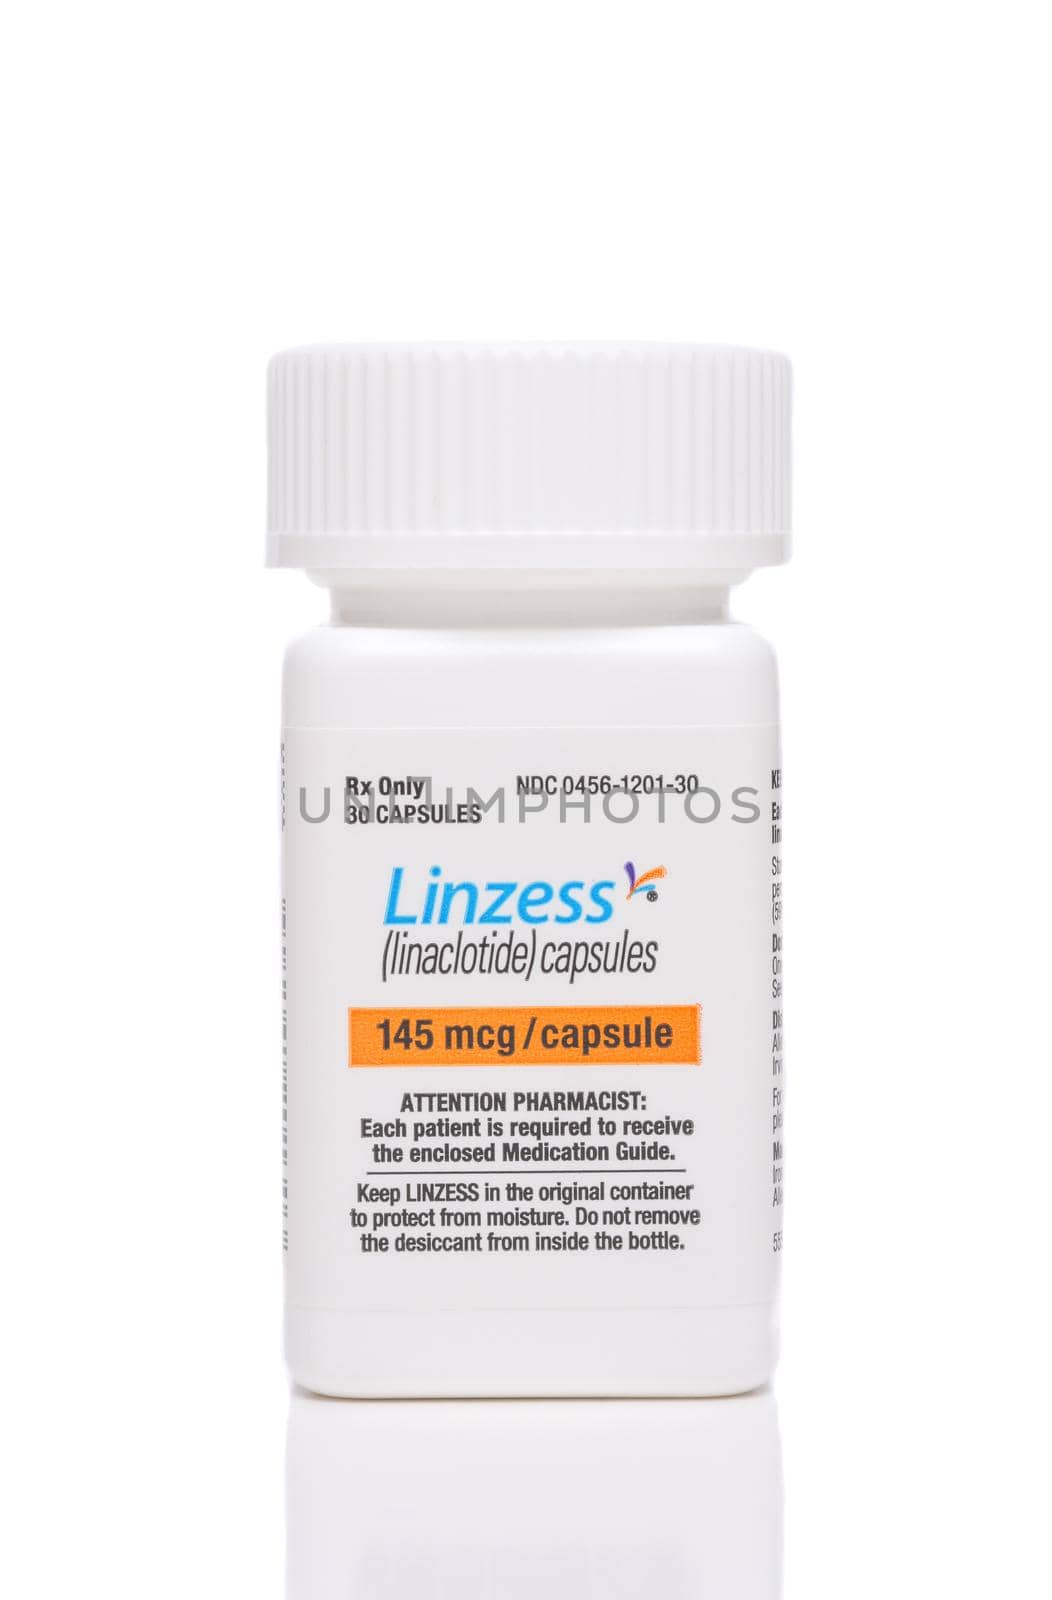 IRVINE, CALIFORNIA - 28 MAY 2021: A bottle of Linzess, linaclotide, capsules. 